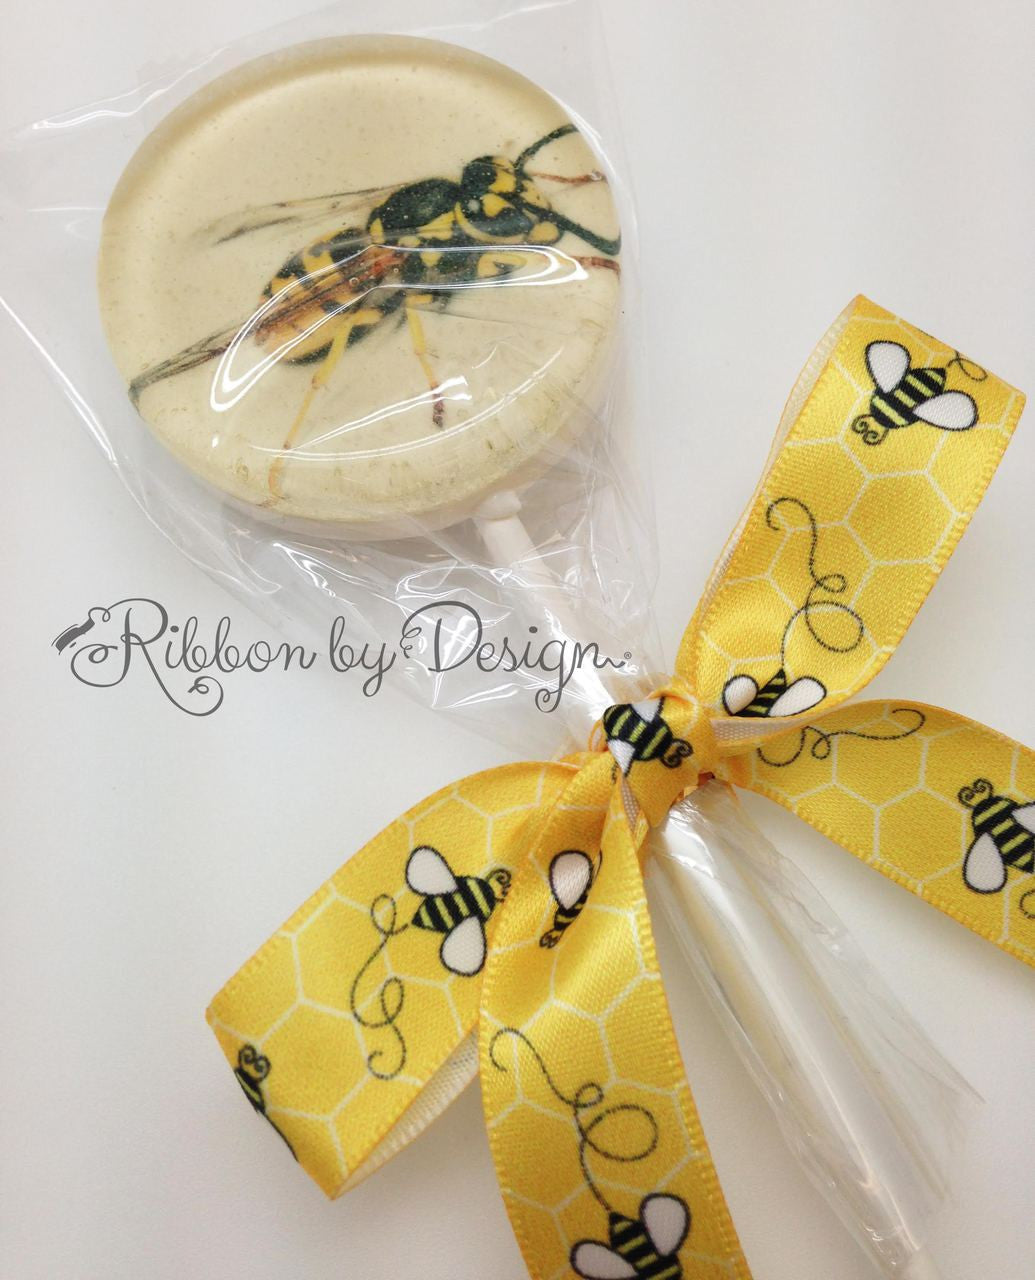 This fun lollipop by Strawberry Hill Confectionary is all dressed up for the party with our buzzing bees!